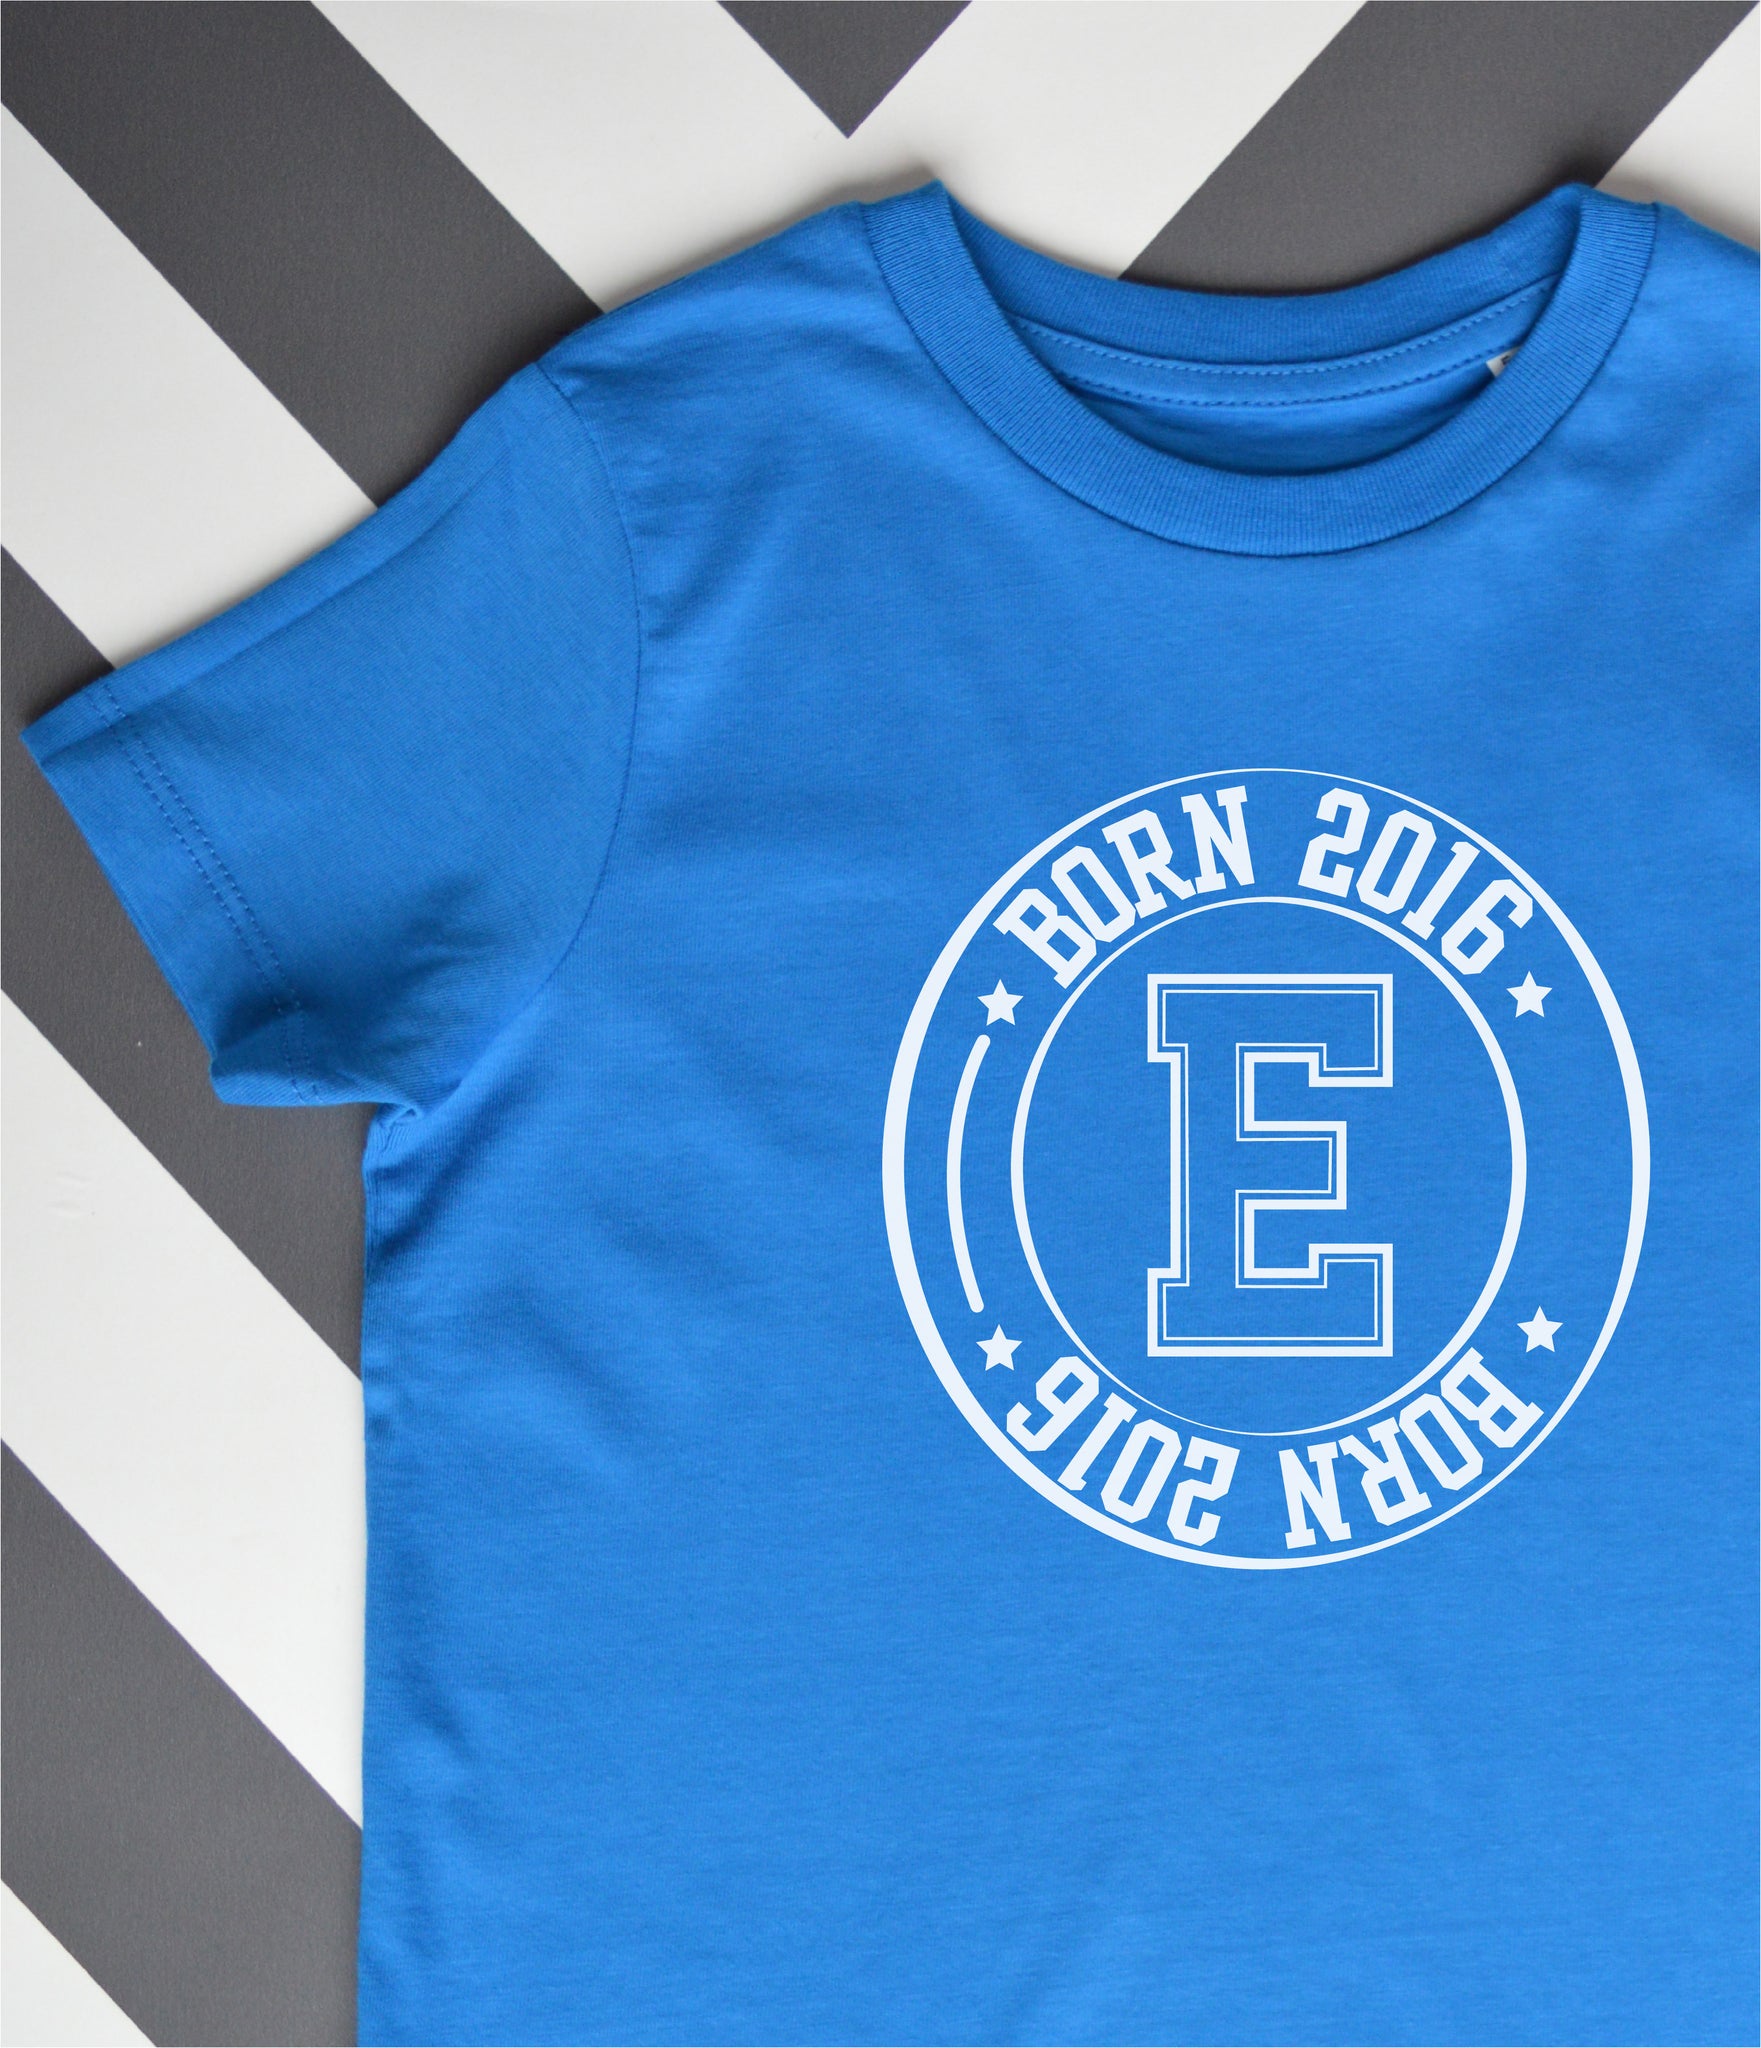 Baby & college year & Letter T shirt Rag to